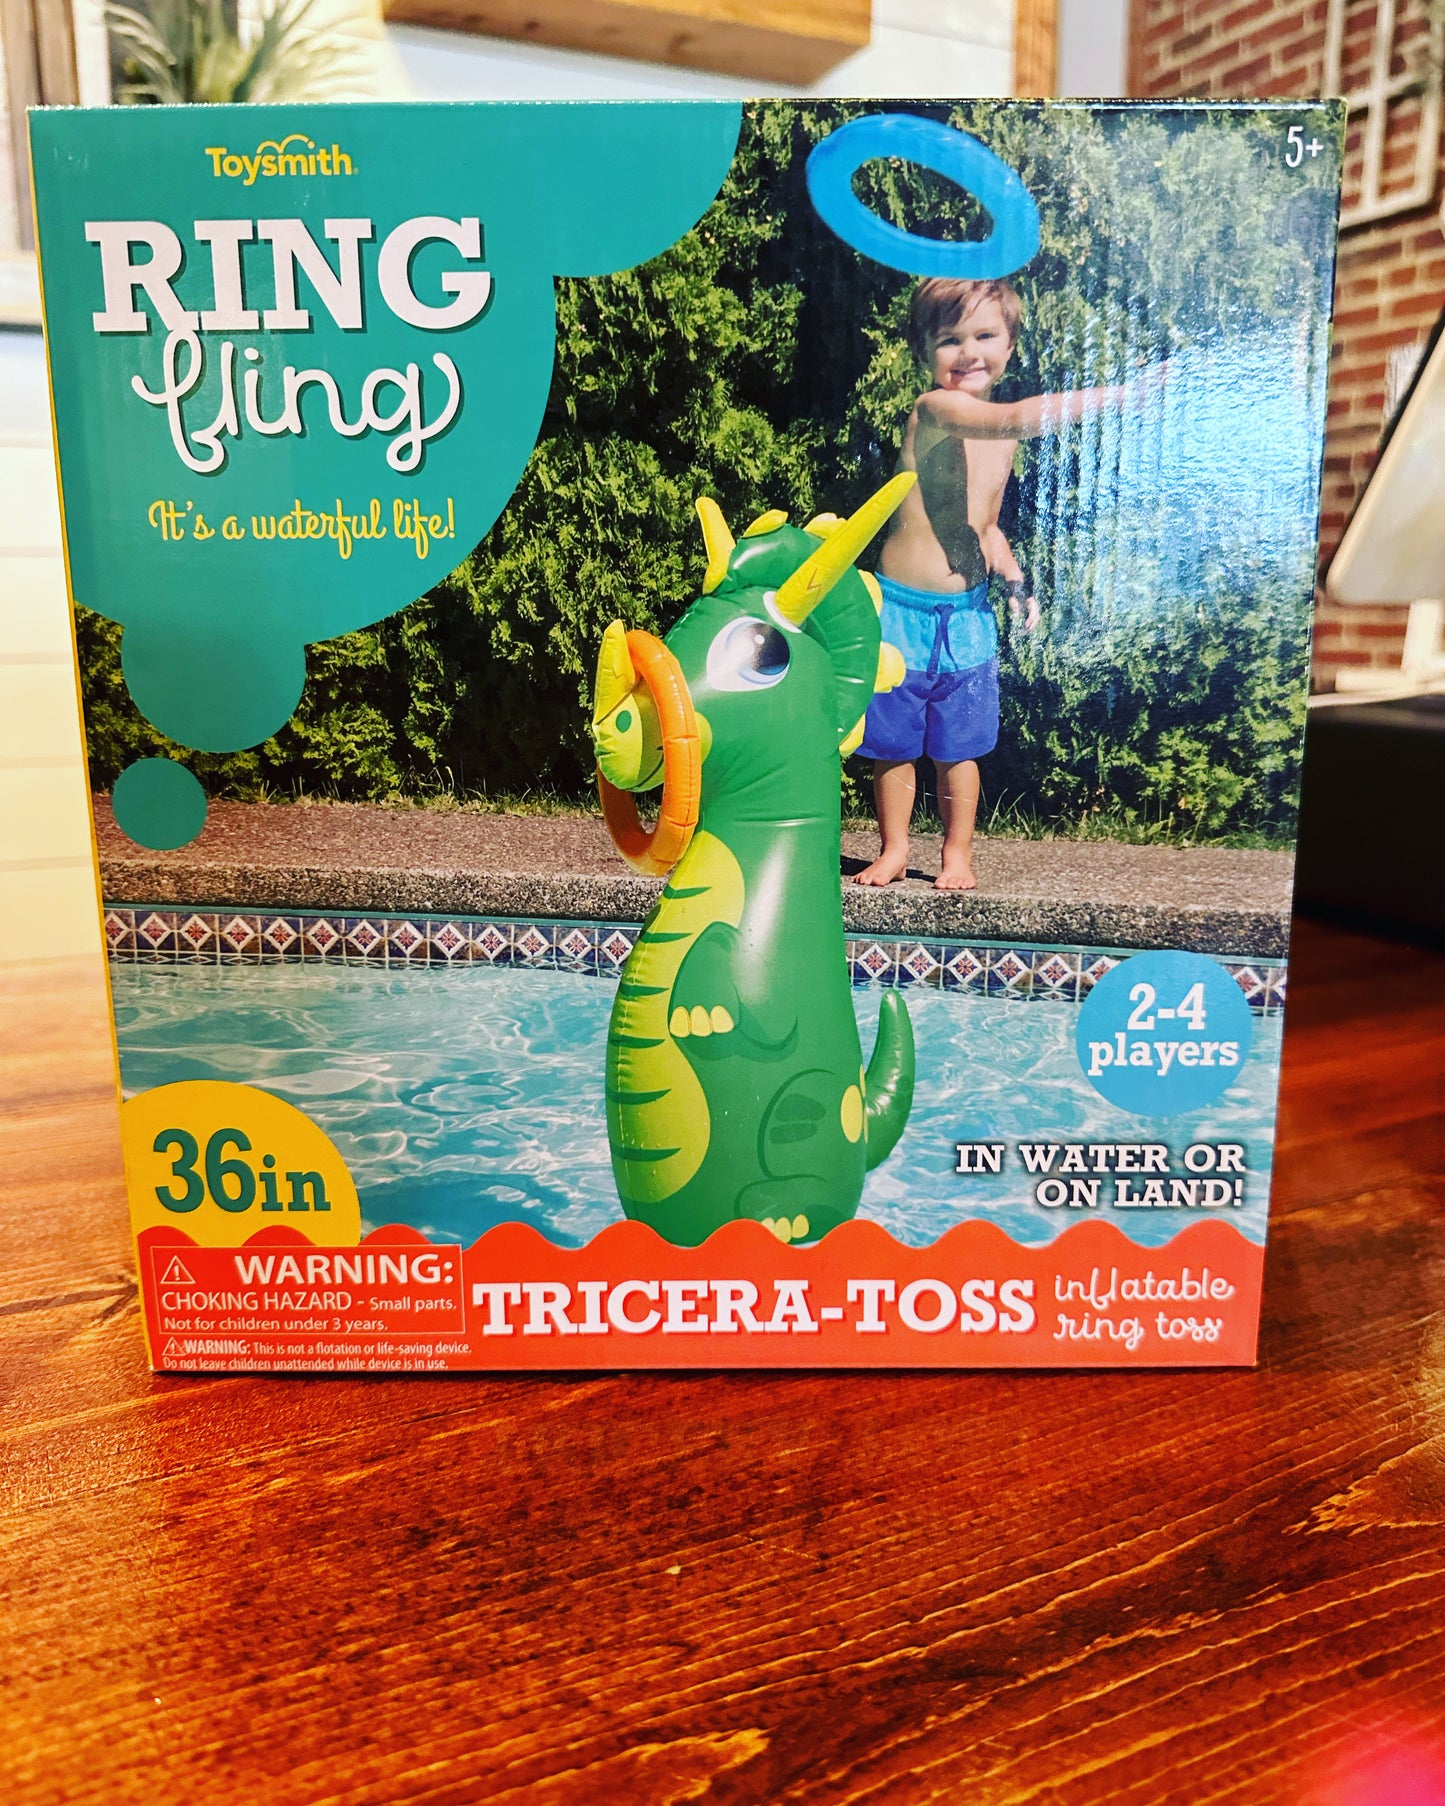 Inflatable Ring Fling